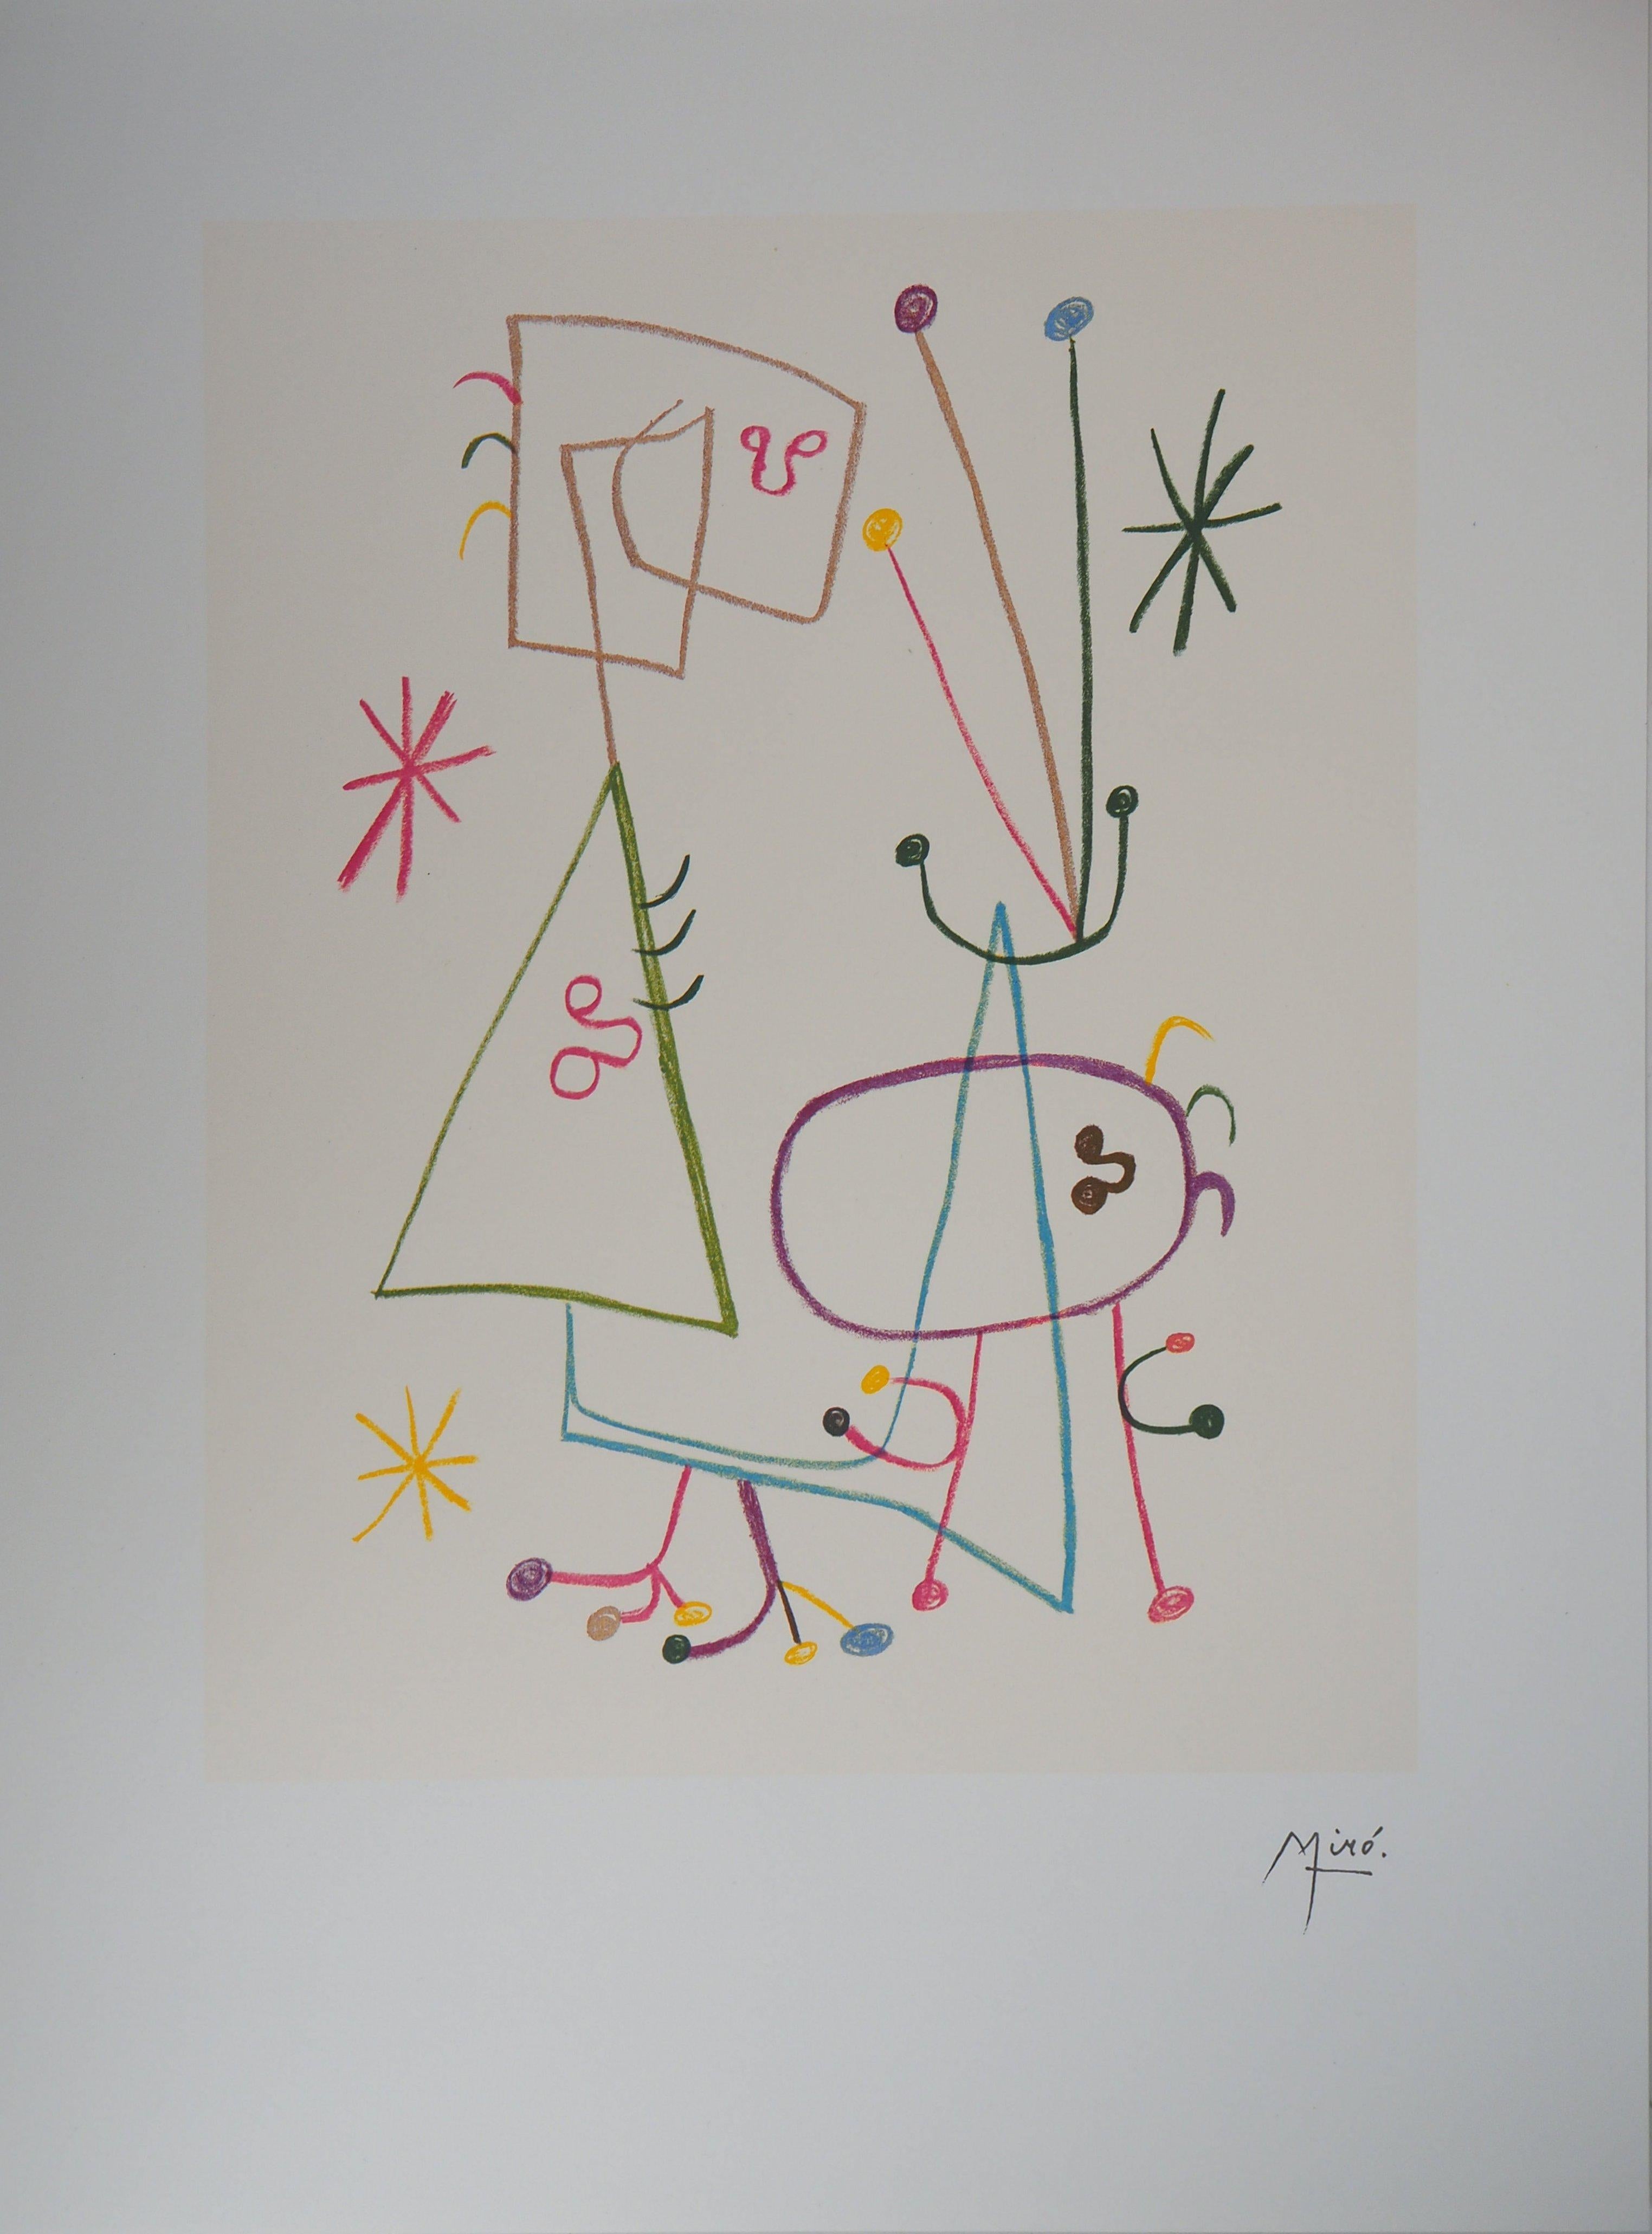 (after) Joan Miró Abstract Print - Family in a Garden with Stars - Lithograph